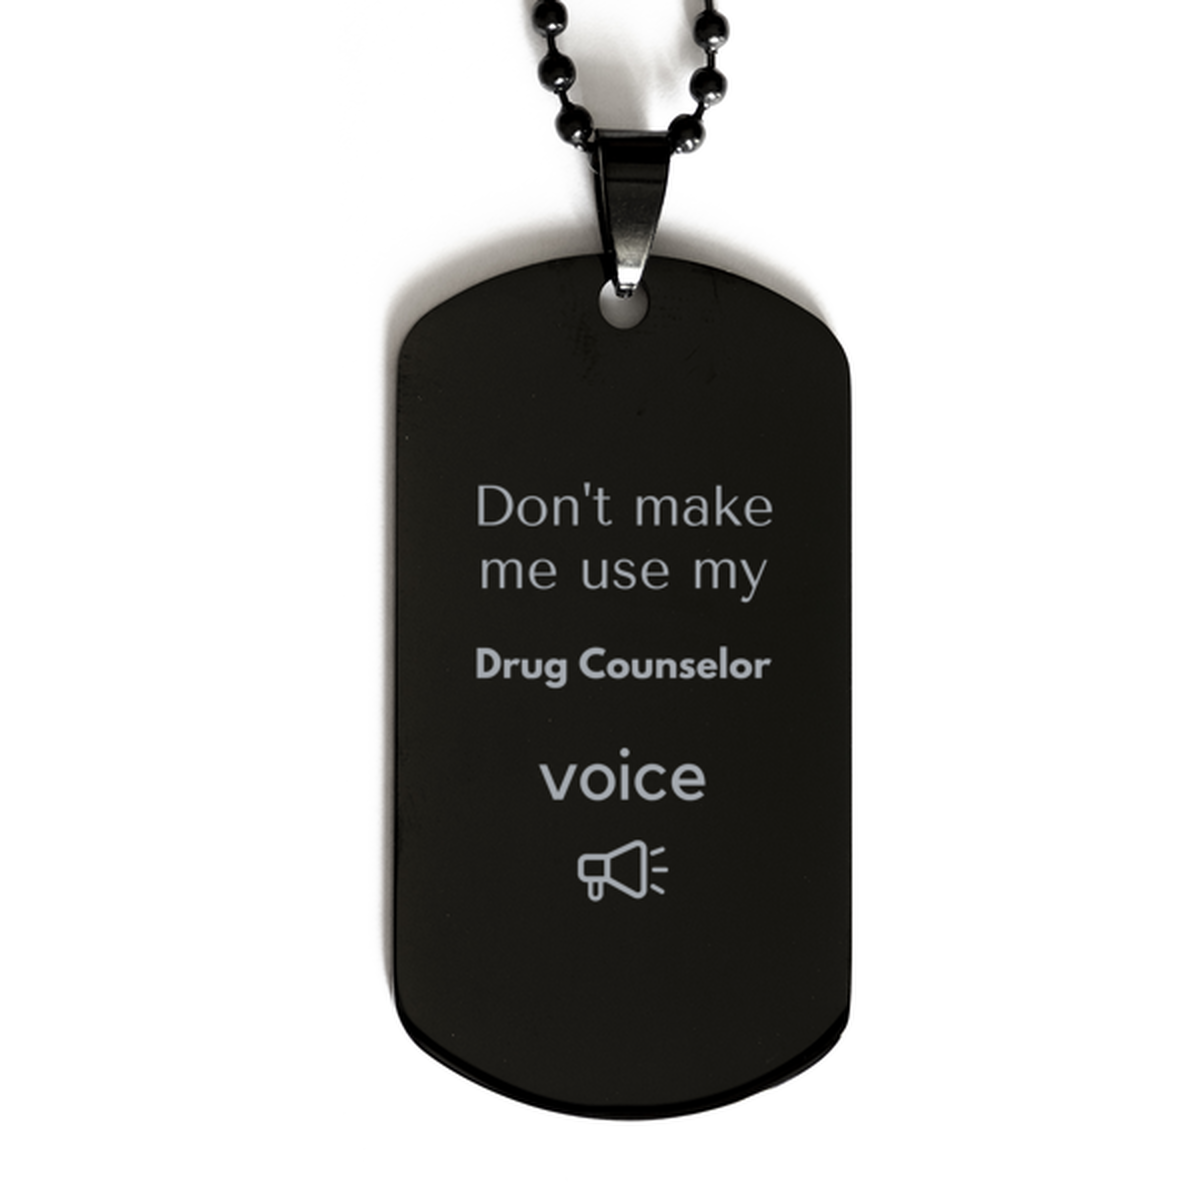 Don't make me use my Drug Counselor voice, Sarcasm Drug Counselor Gifts, Christmas Drug Counselor Black Dog Tag Birthday Unique Gifts For Drug Counselor Coworkers, Men, Women, Colleague, Friends